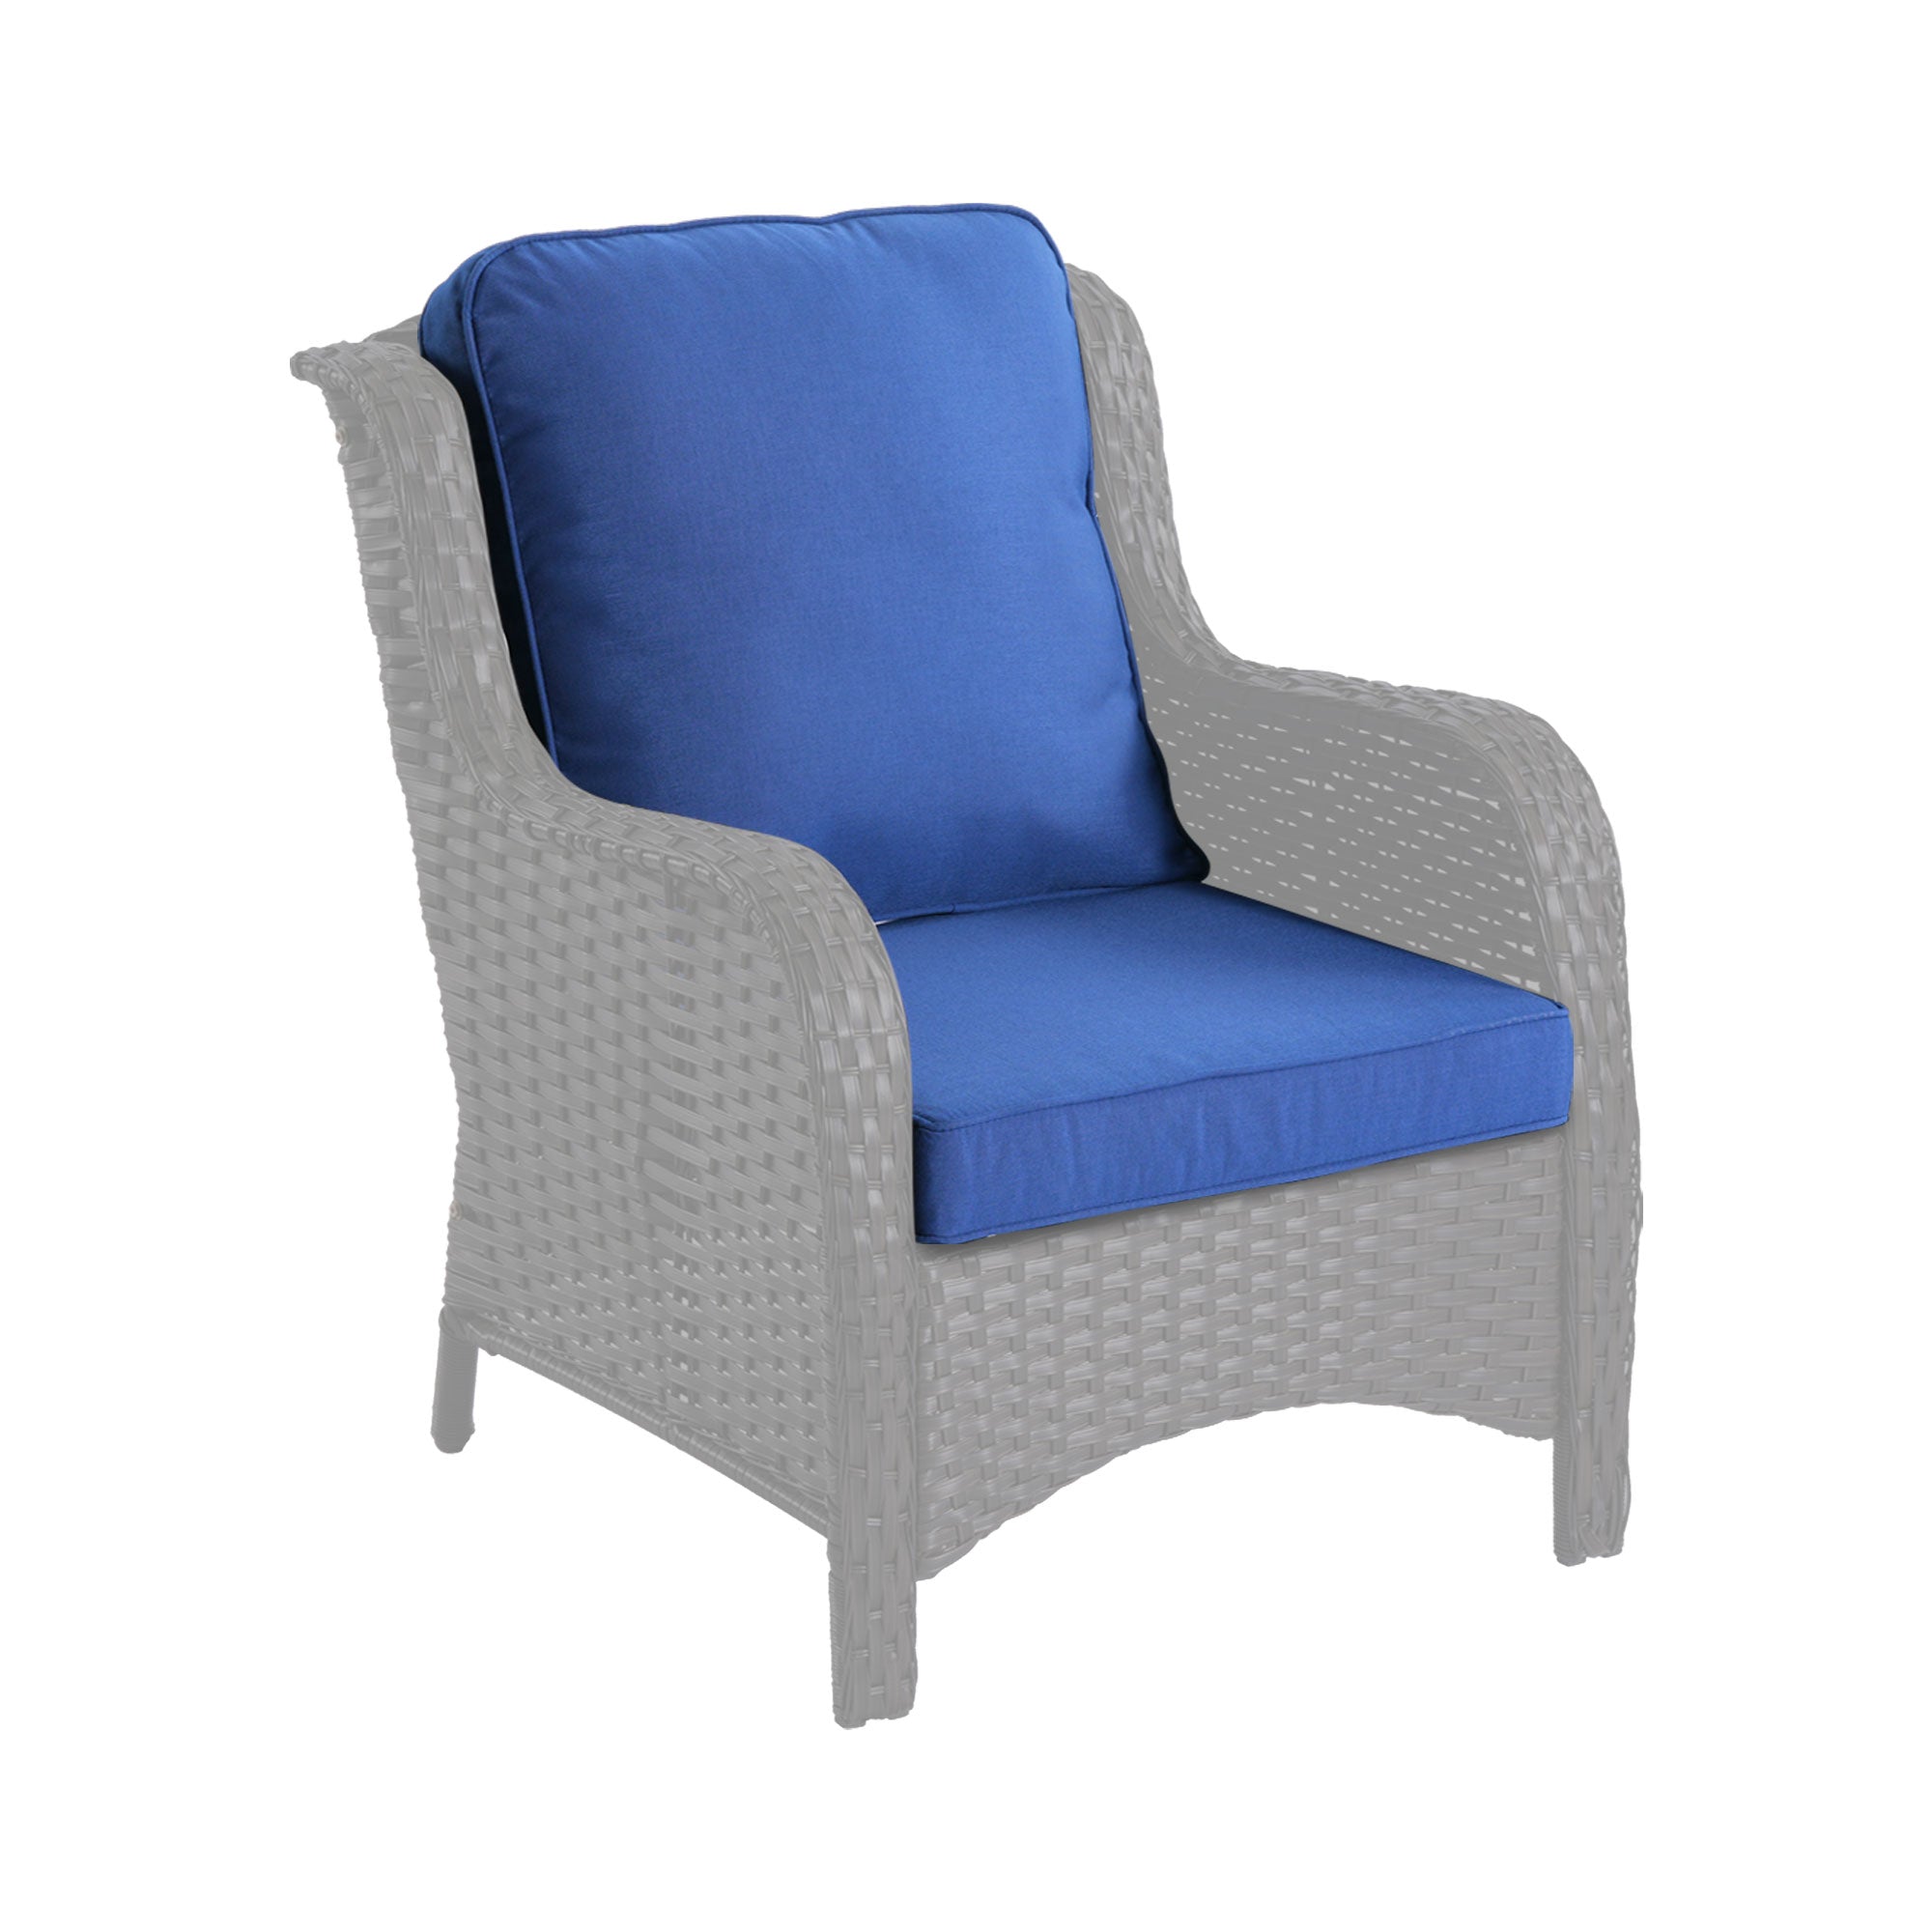 Ovios Kenard Series Replacement Seat, Back Cushion (Refer to the Dimension in Description,Only cushion)